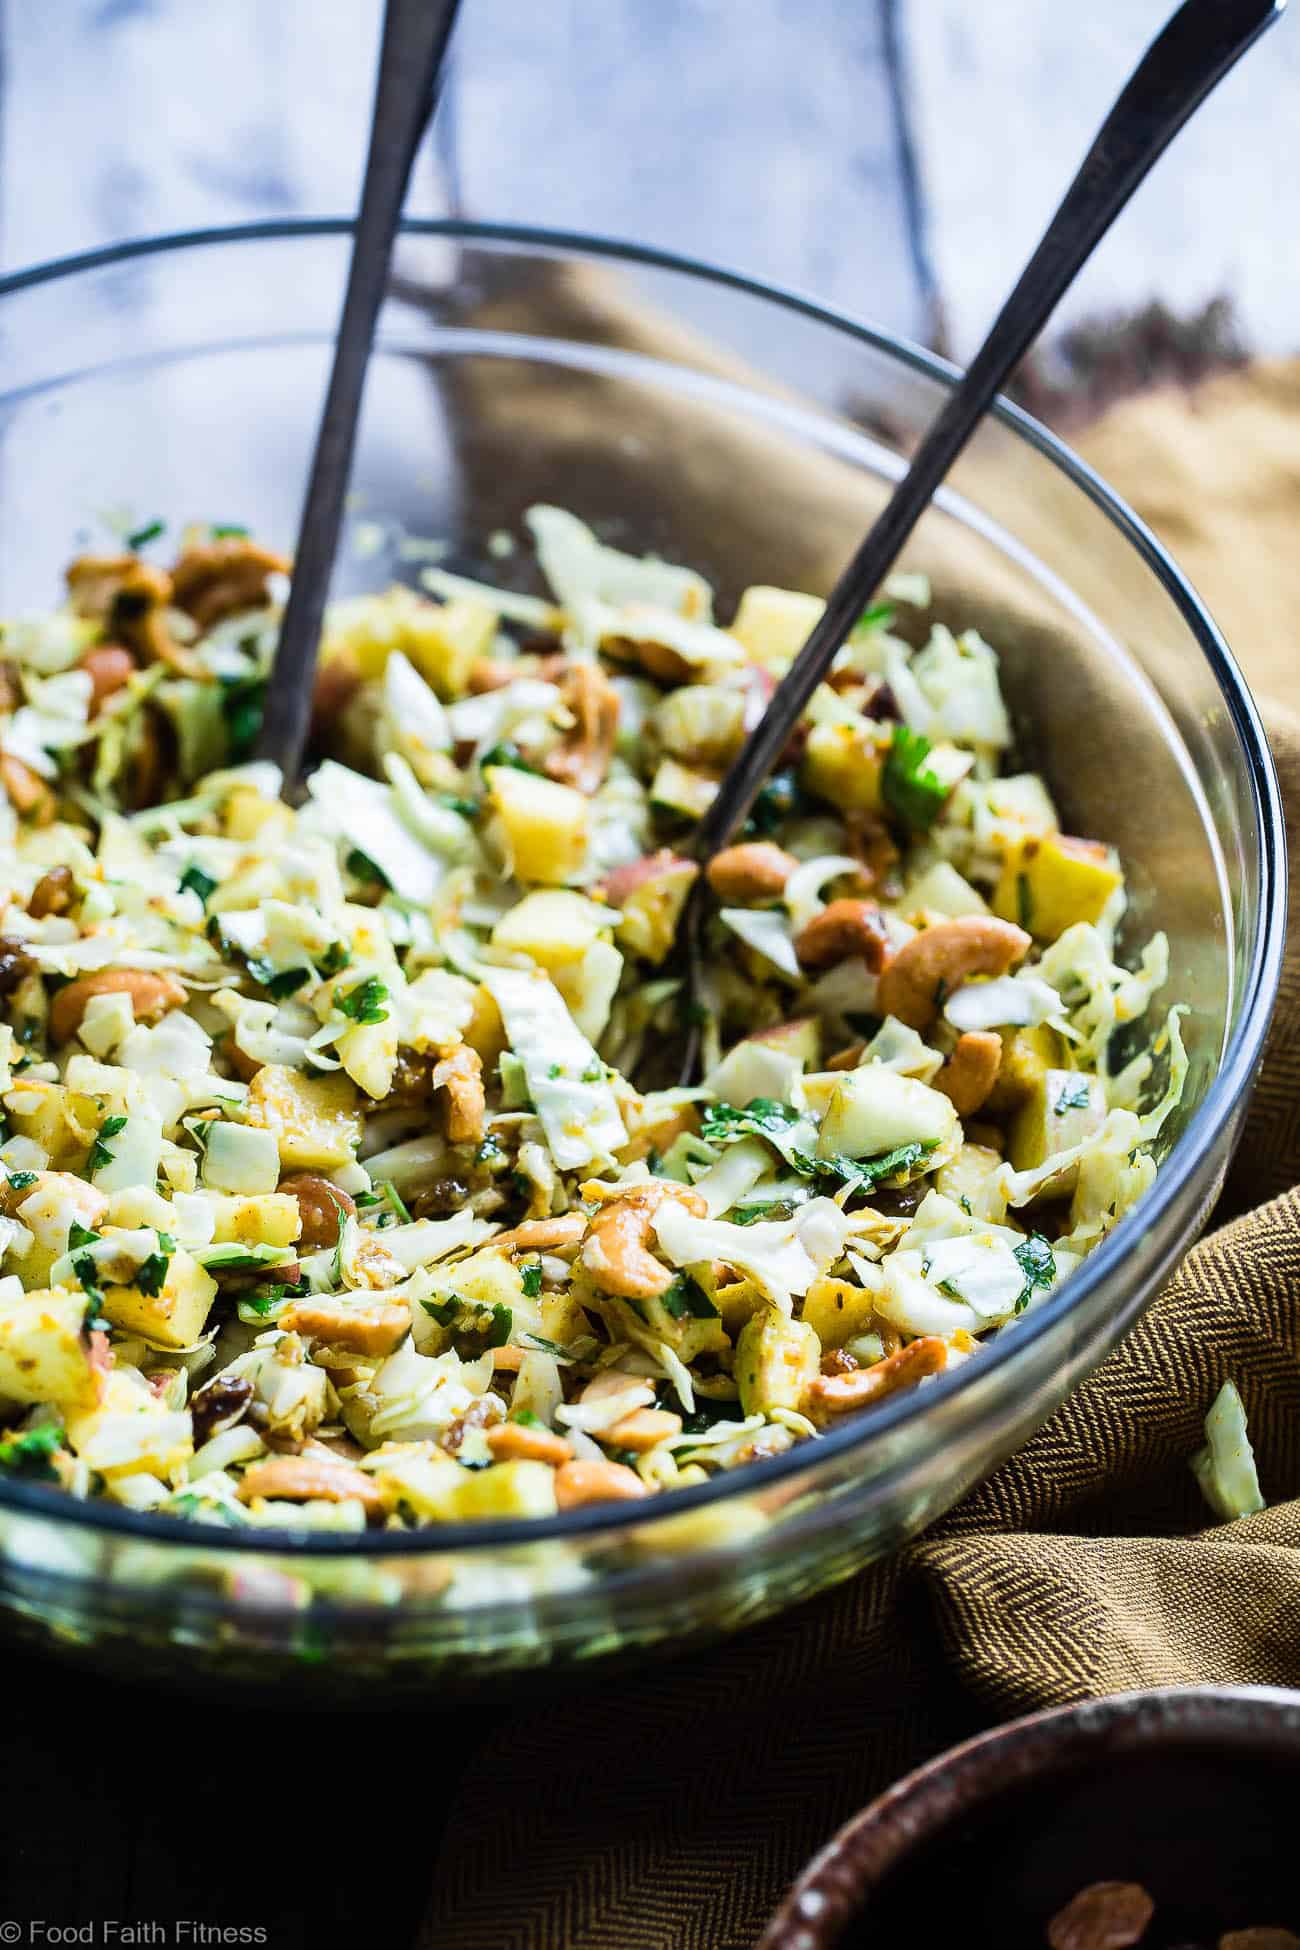 Curry Cashew Shredded Cabbage Salad with Apples - A sugar and gluten free healthy easy cabbage salad recipe that is mixed with a creamy curry dressing and crunchy cashews! A healthy, paleo and whole30 side dish that everyone will love! | Foodfaithfitness.com | @FoodFaithFit